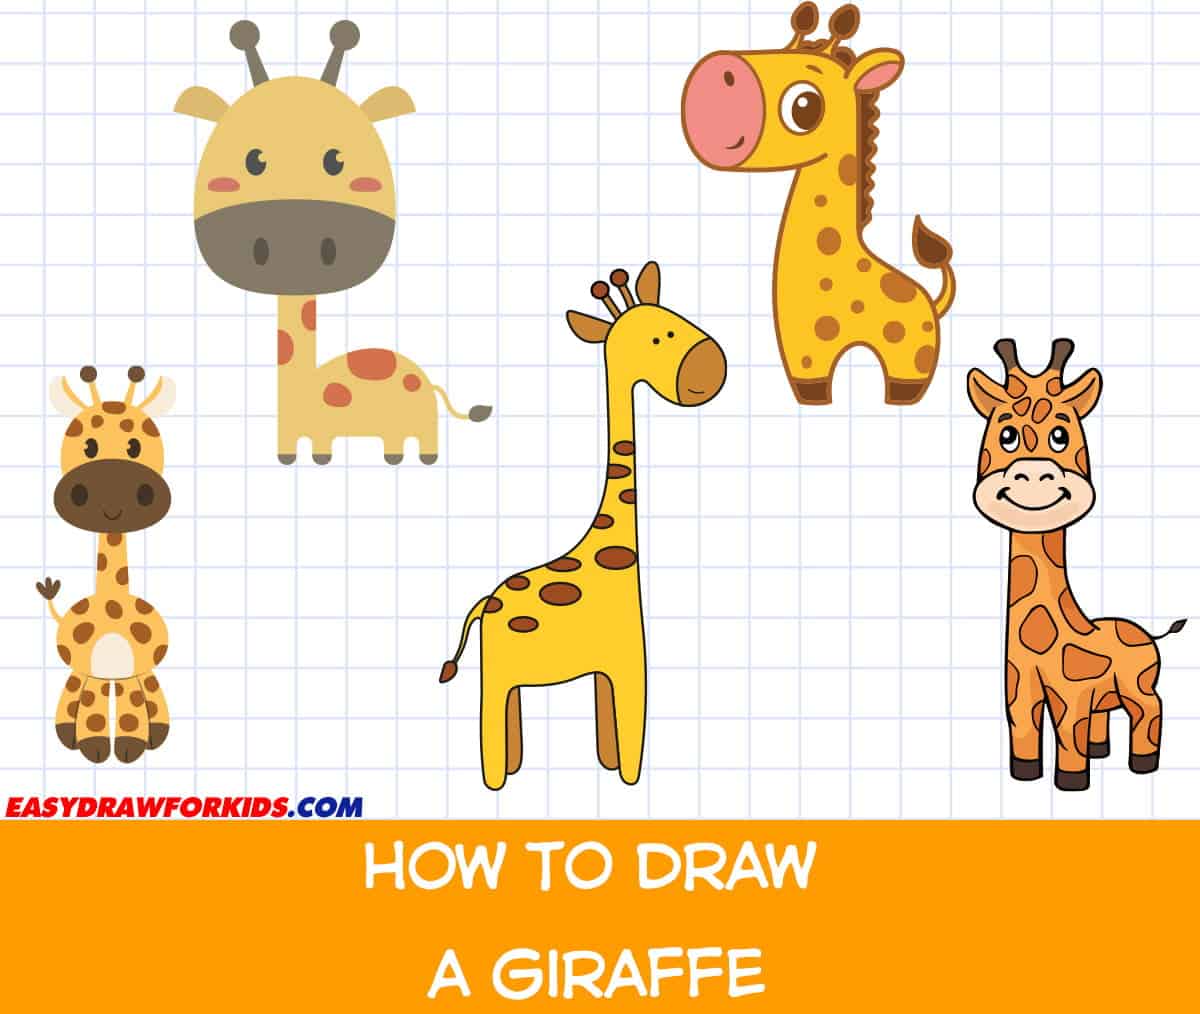 Giraffe Cartoon Characters Isolated On White Background For Kids Coloring  Book High-Res Vector Graphic - Getty Images